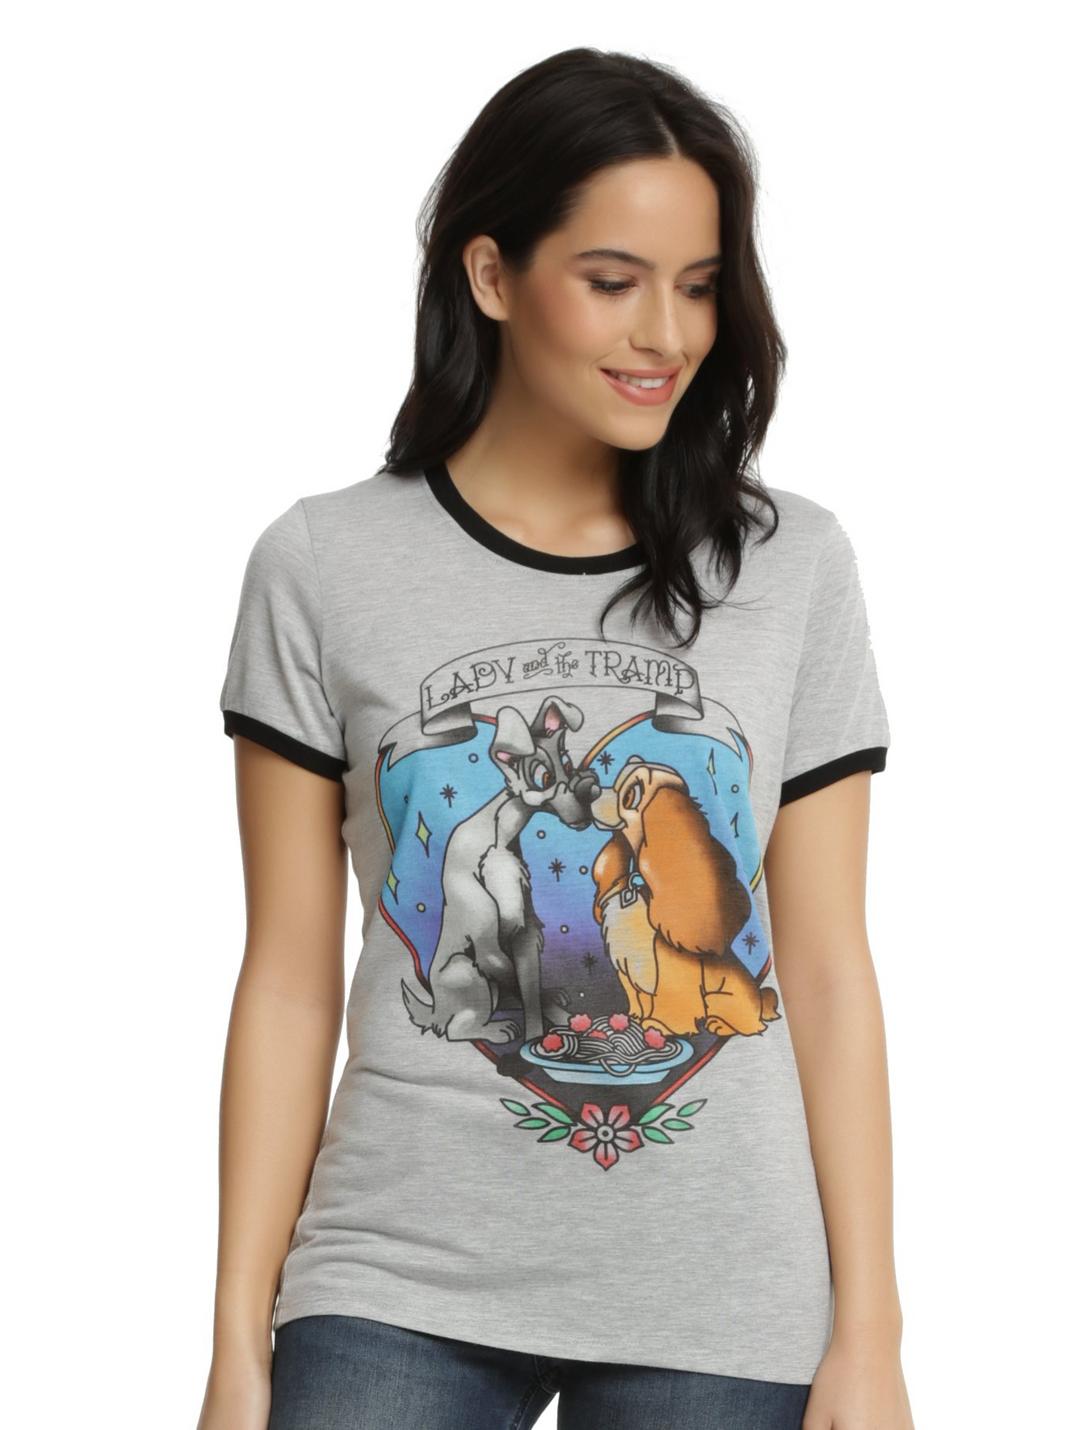 Disney Lady And The Tramp Heart Tattoo Girls Ringer T-Shirt, GREY, hi-res